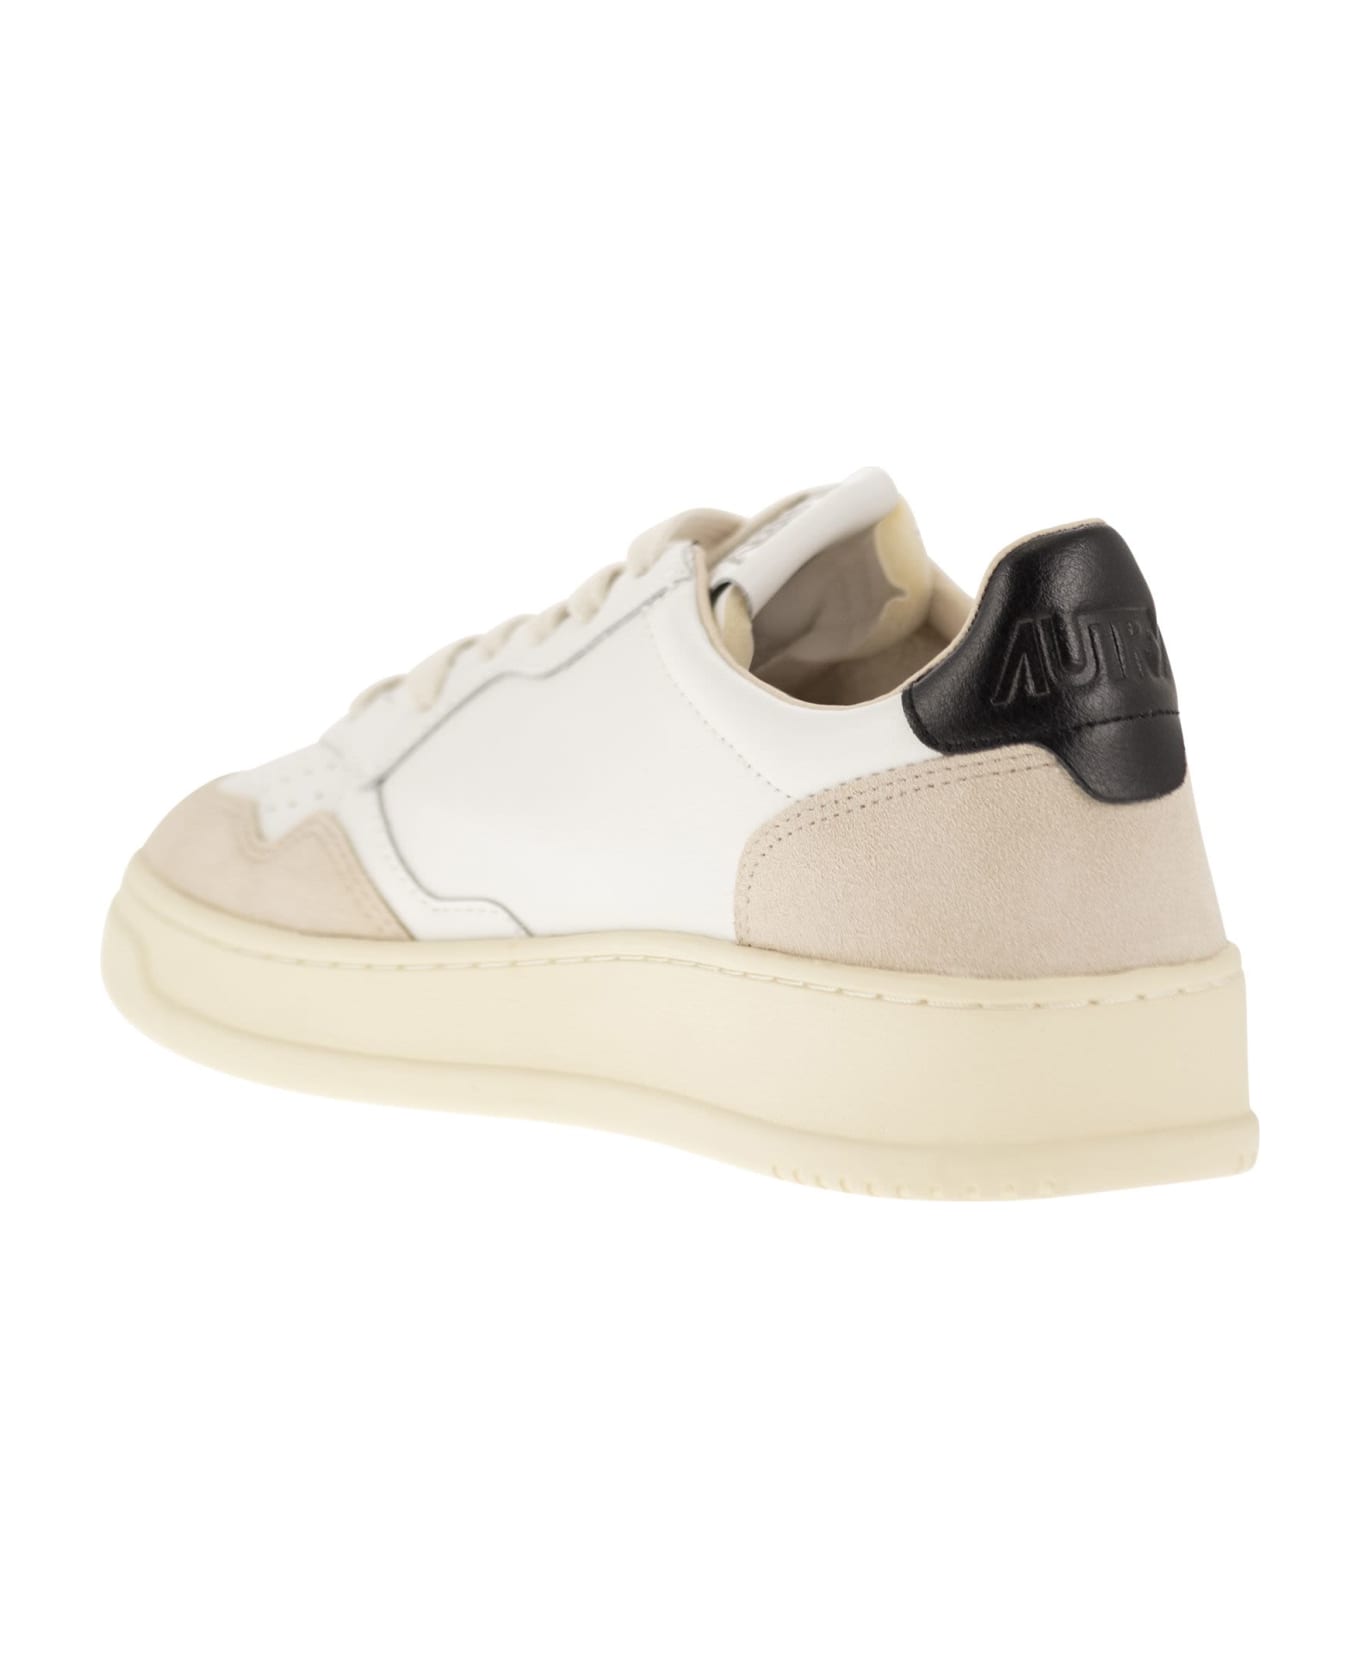 Autry Medalist Low - Leather And Suede Sneakers - White Black スニーカー